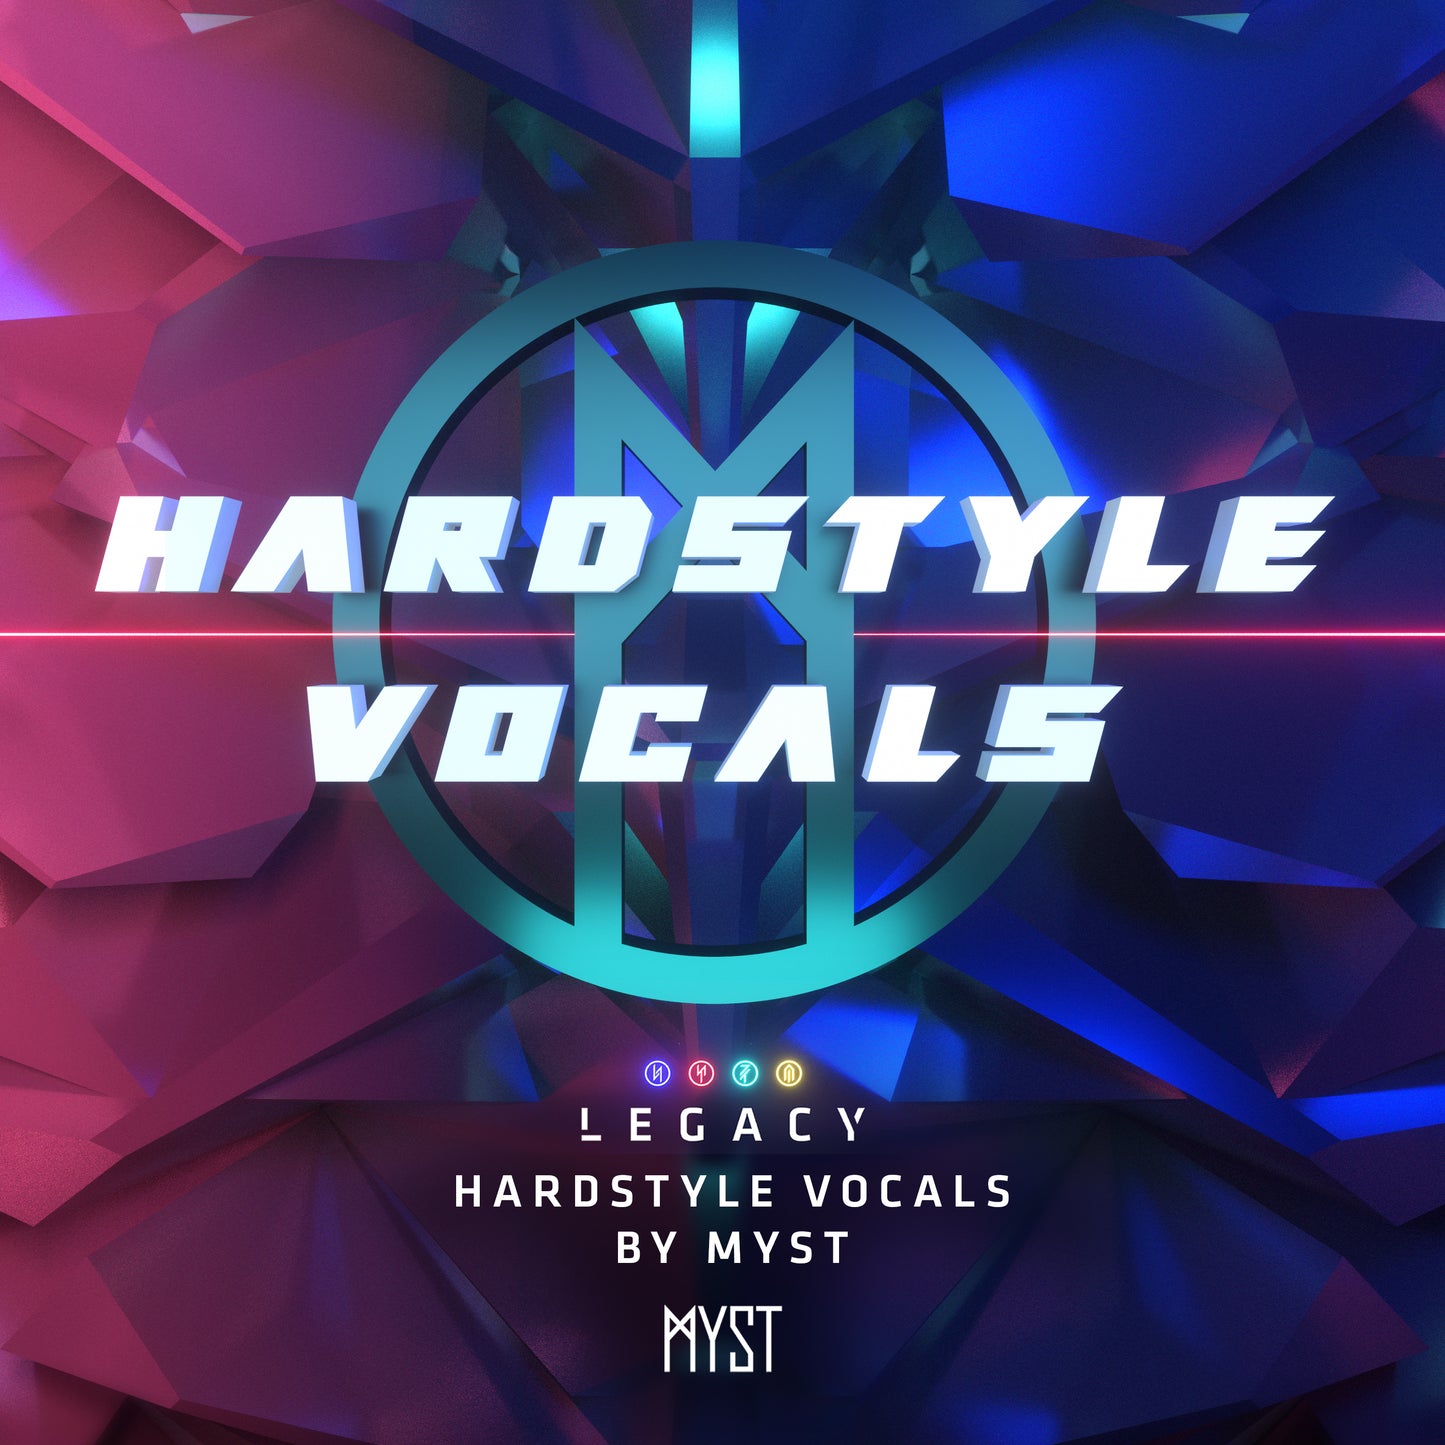 LEGACY - Hardstyle Vocals By MYST